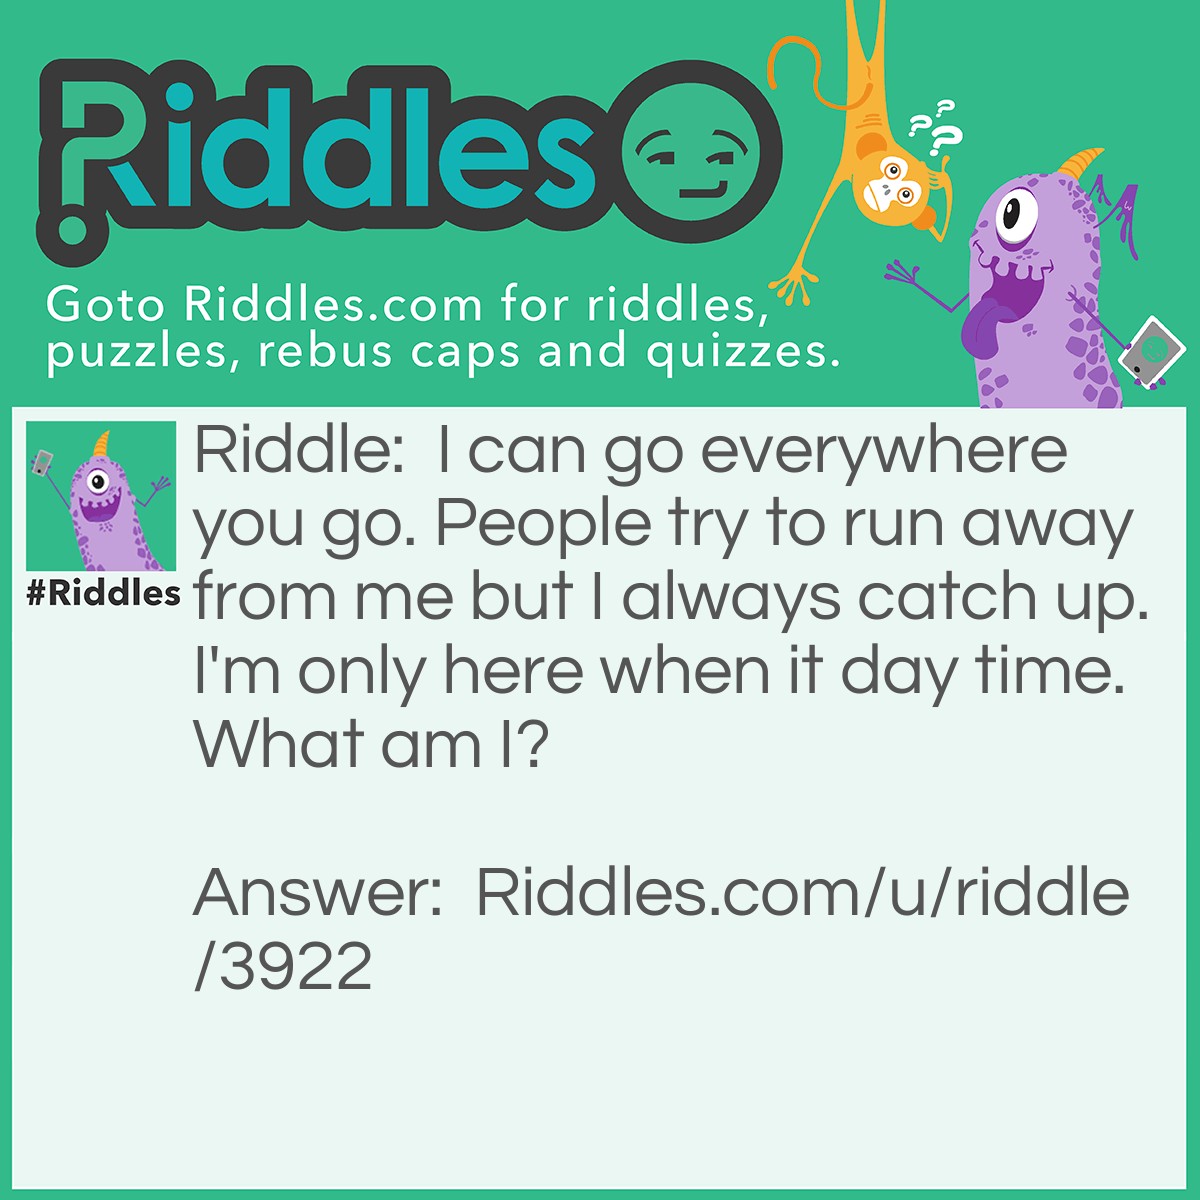 Riddle: I can go everywhere you go. People try to run away from me but I always catch up. I'm only here when it day time. What am I? Answer: Your shadow.